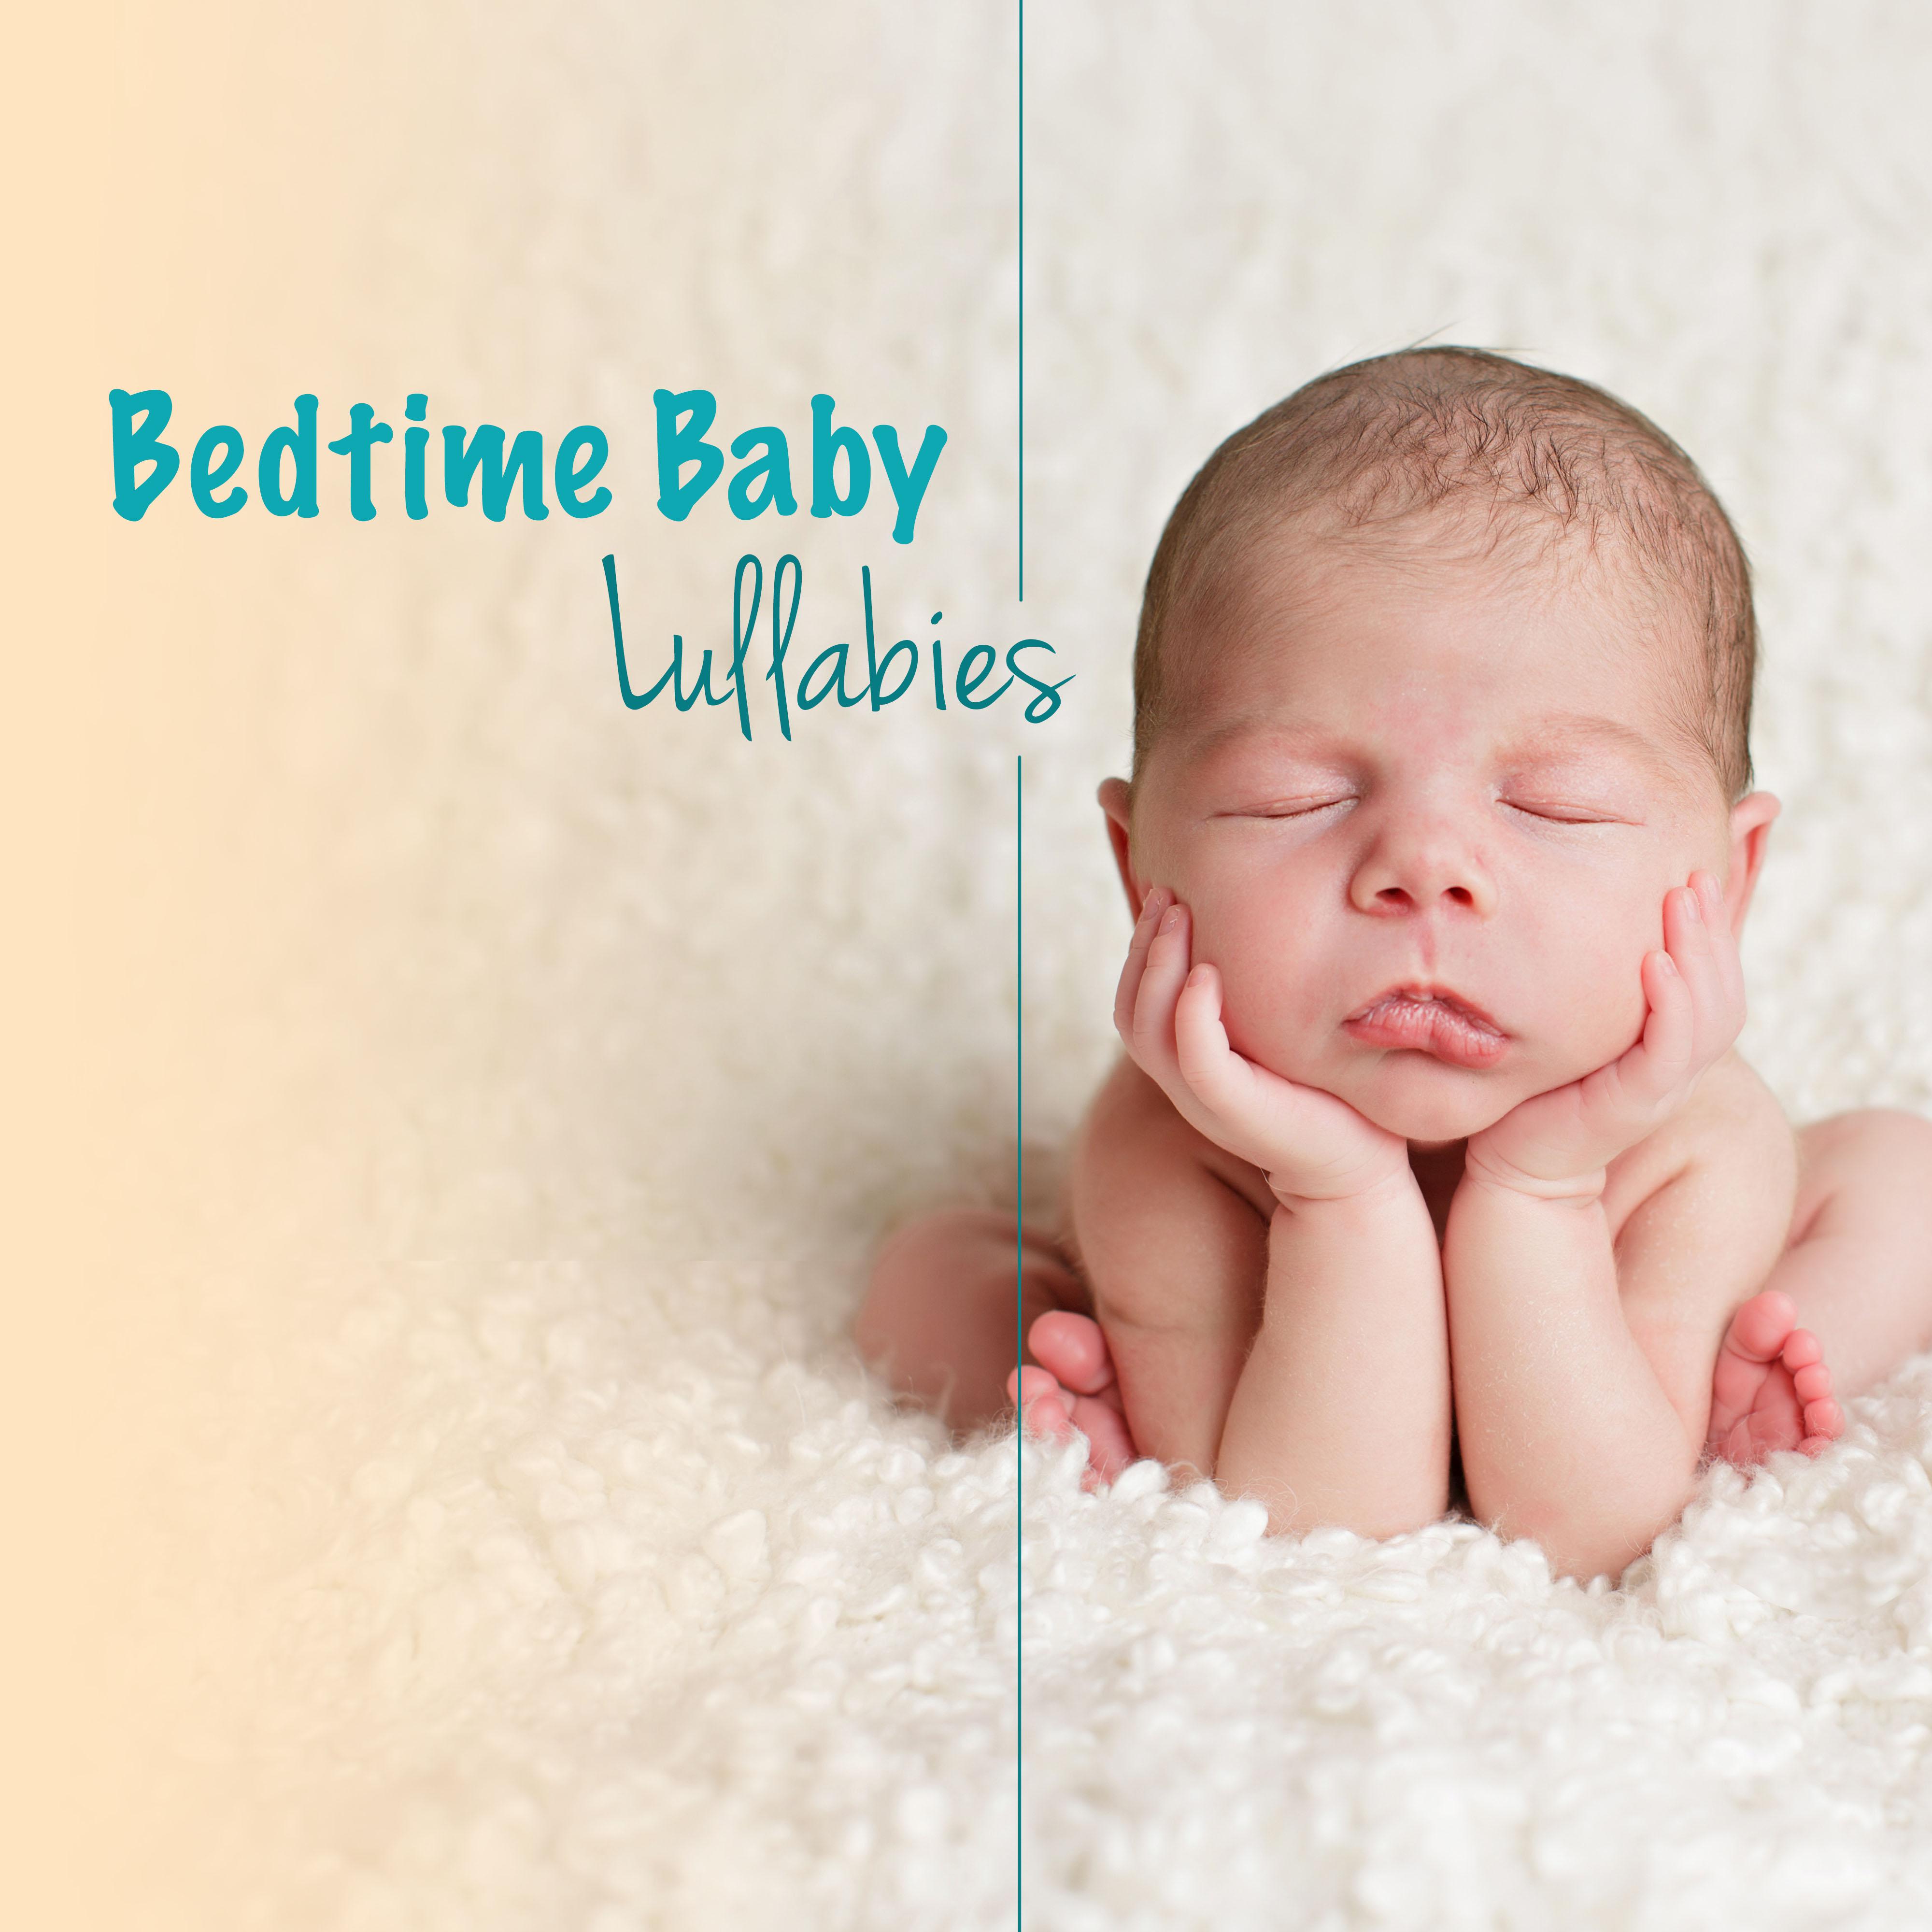 Baby Bedtime Lullabies - Sleep Therapy Music for Newborns and Toddlers